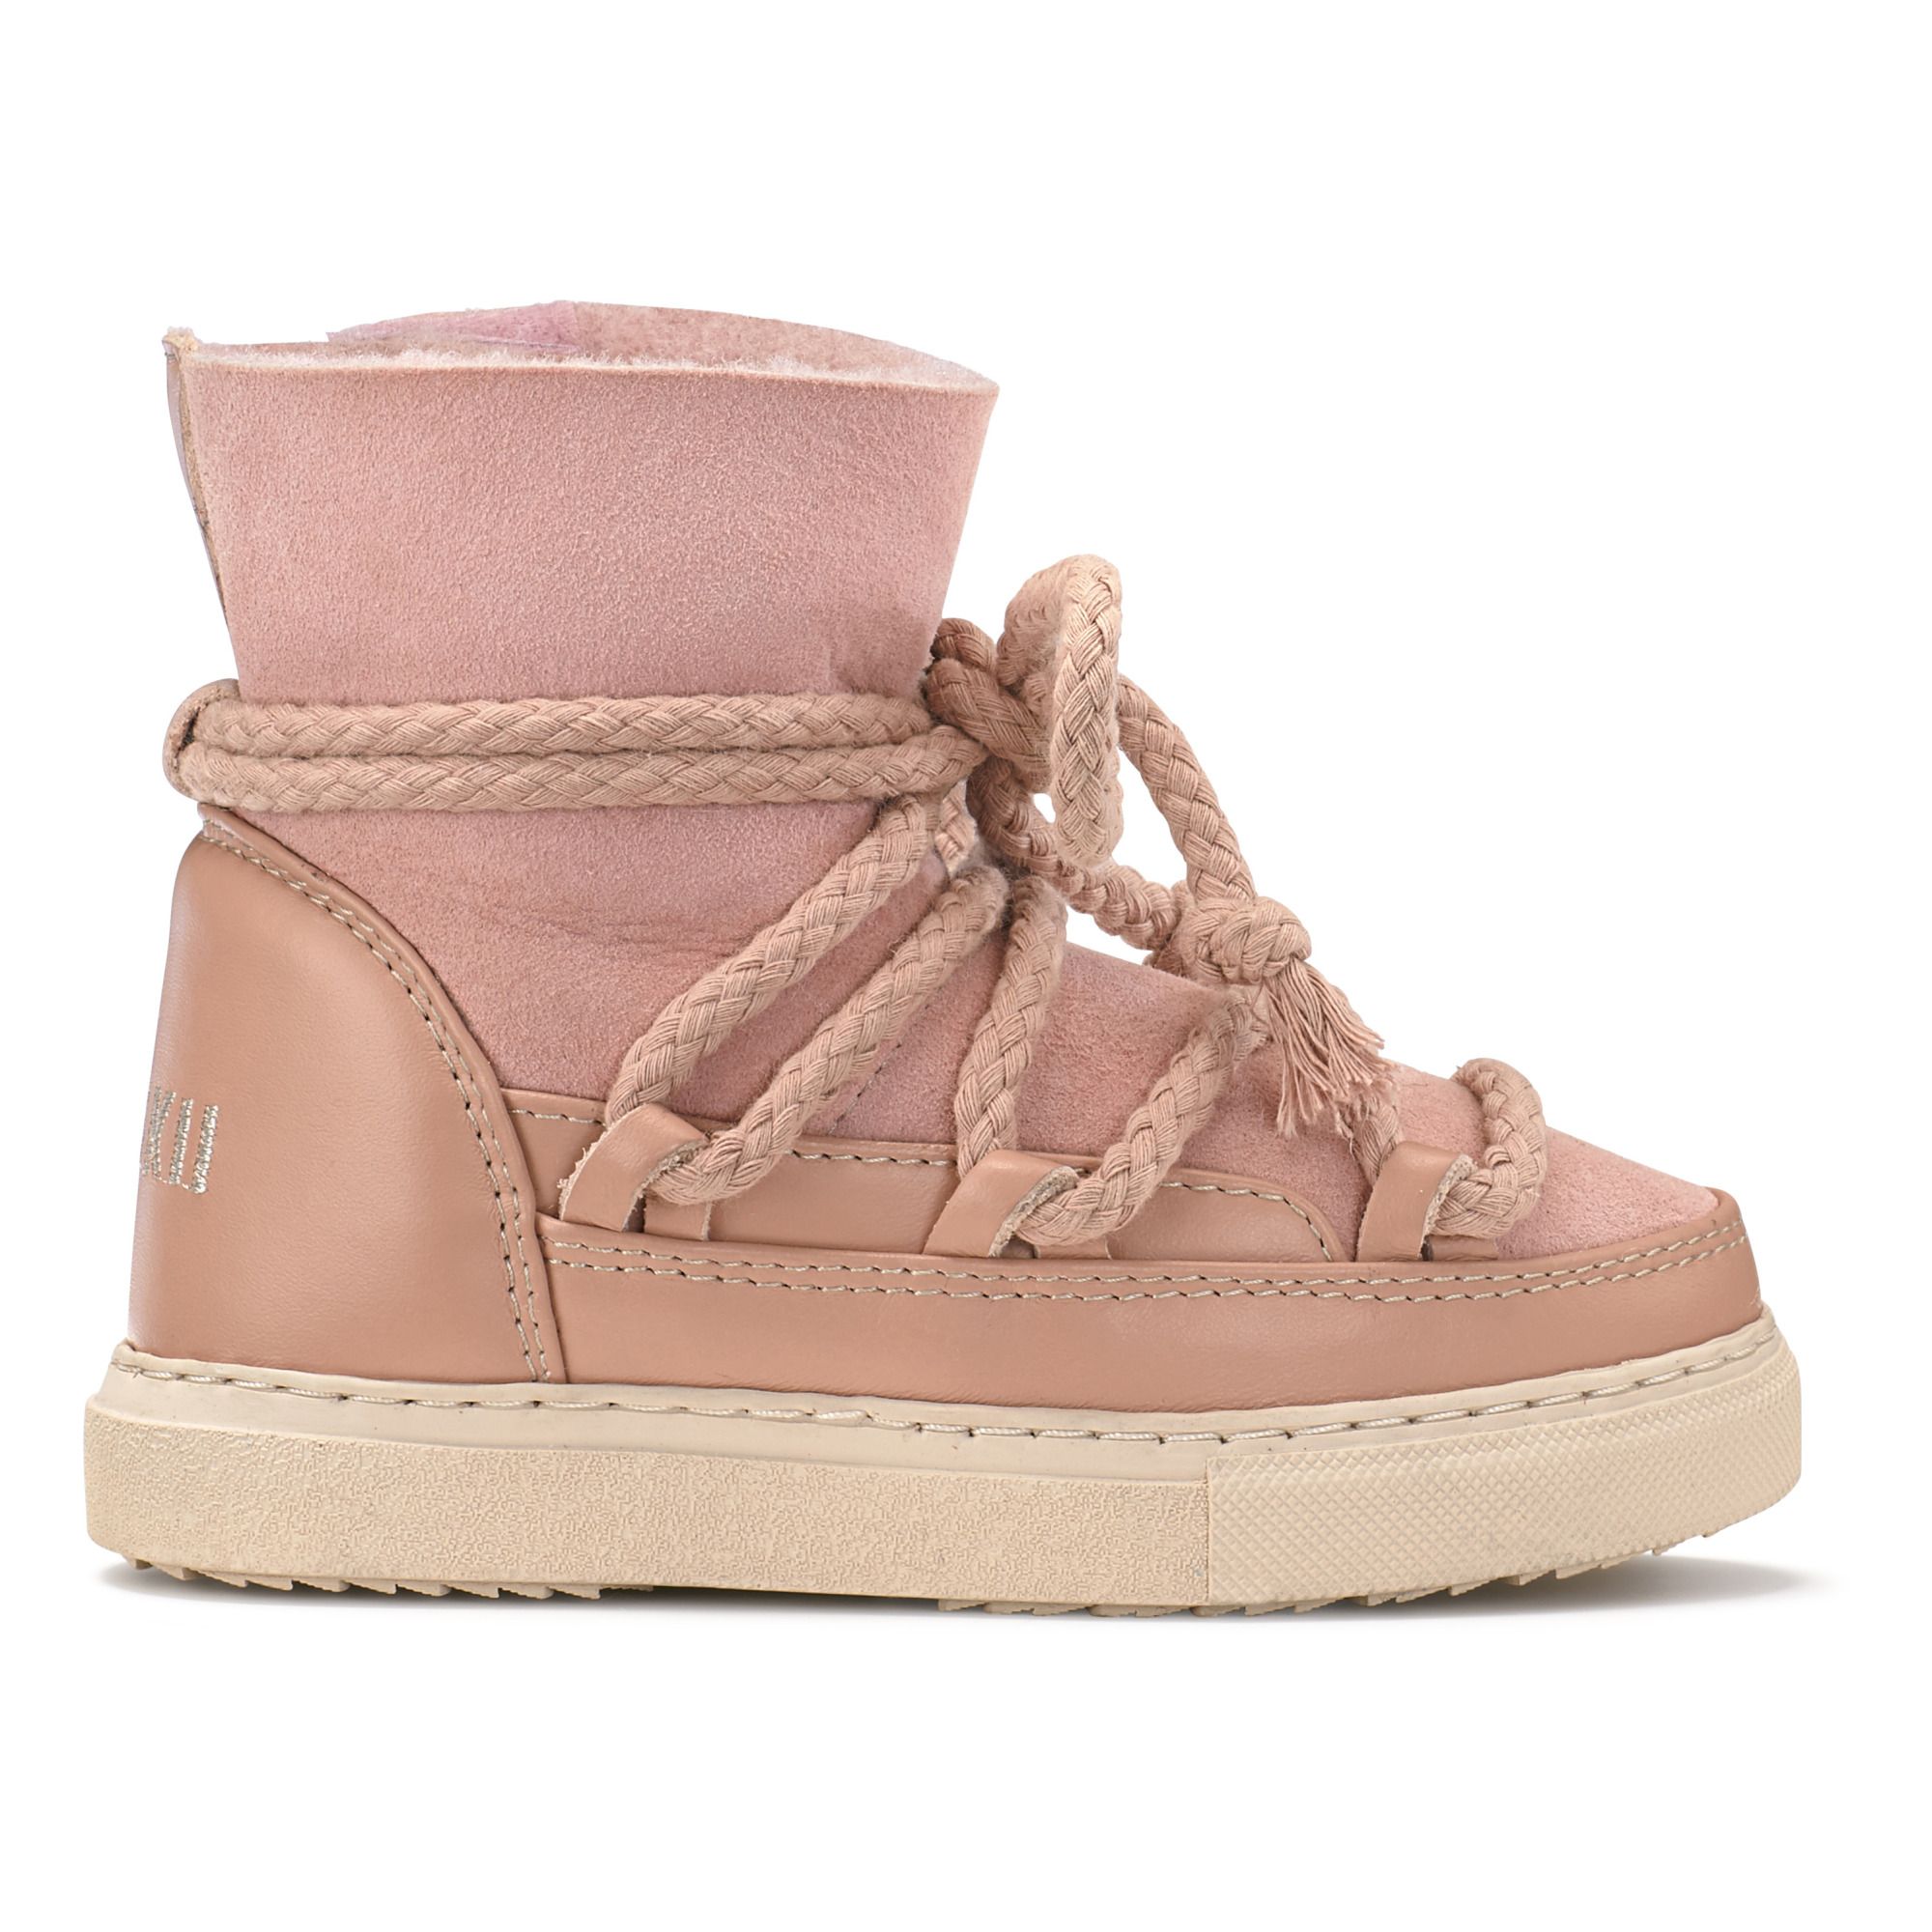 Inuikii - Sneaker Classic - Collection Enfant - - Fille - Rose